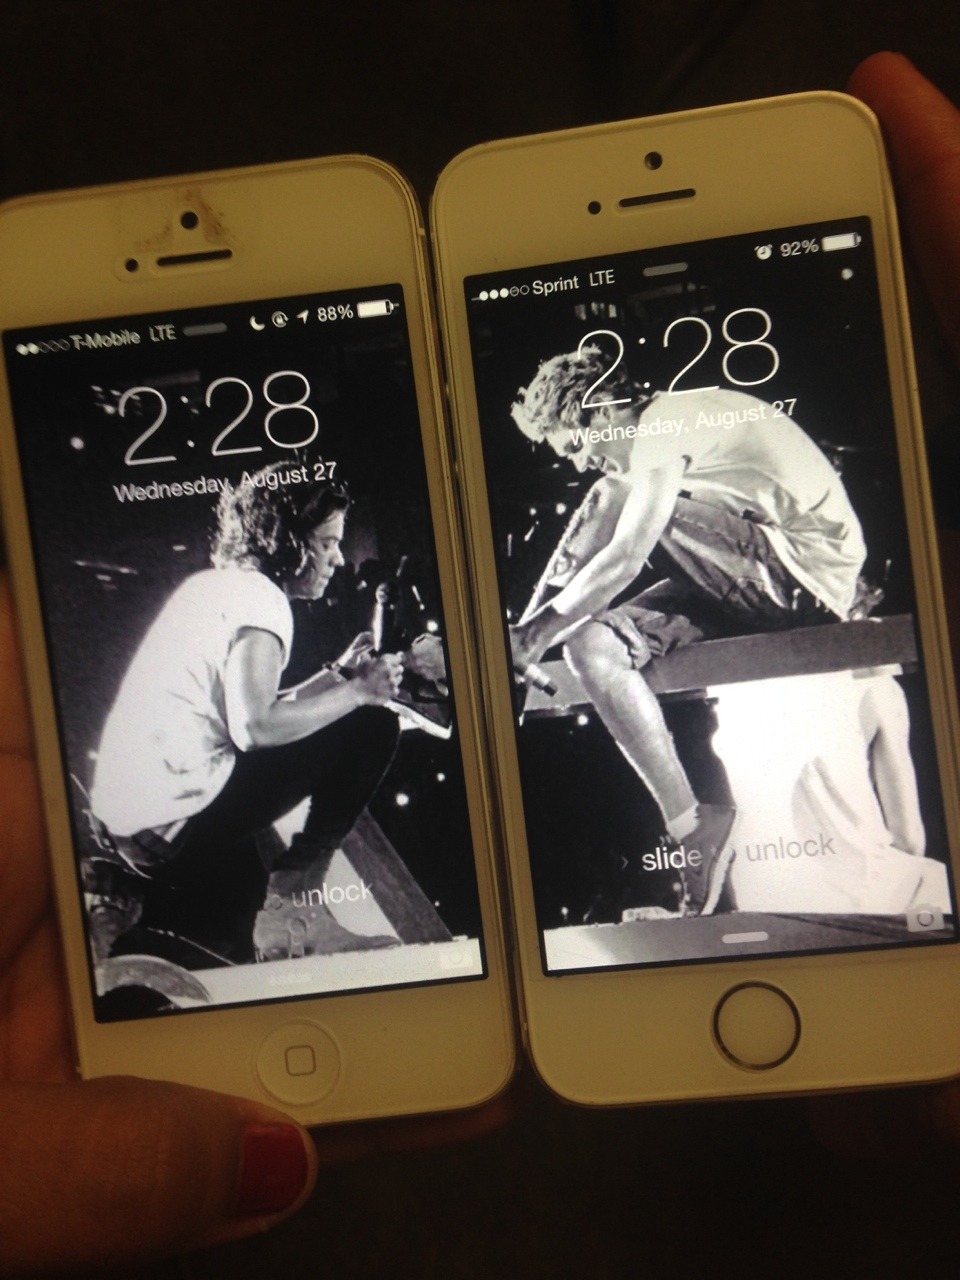 narrypm:
“My best friend has successfully boarded the narry ship after I talked about narry so much and this happened:
”